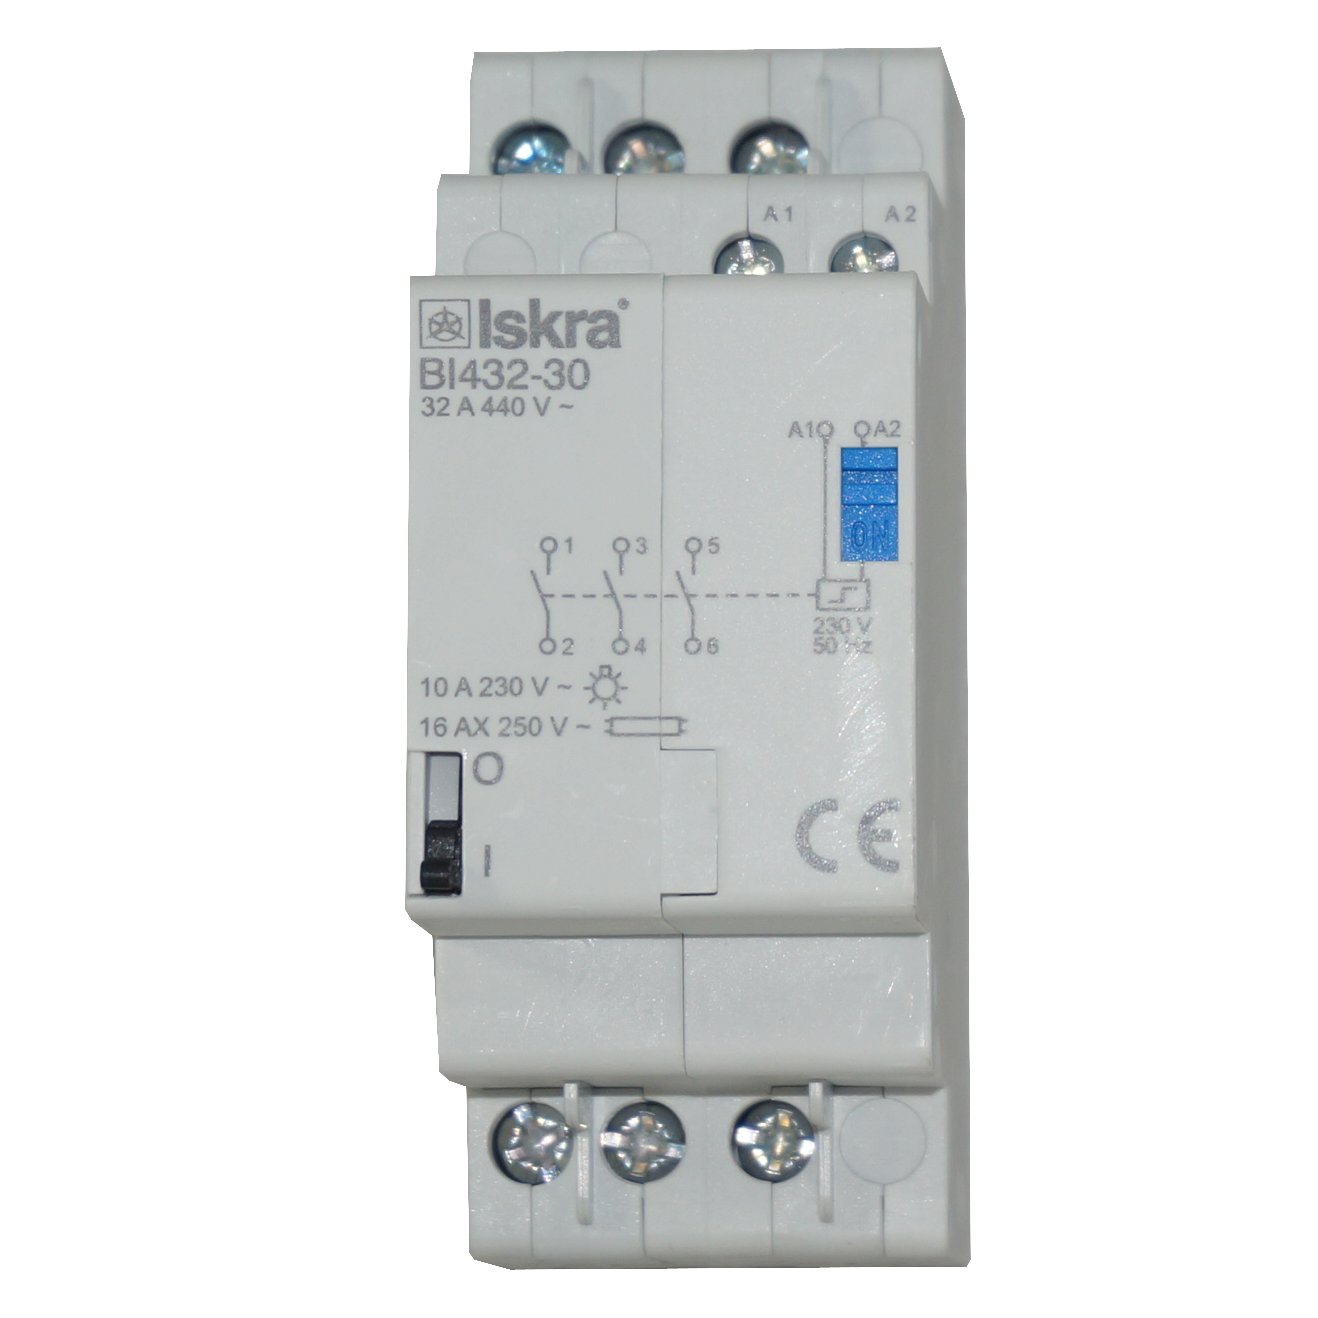 BI432-30-24VAC, Three Pole 3 x SPST Bistable Switch/Latching Relay with Manual Control, 440VAC, 32 Amp 24VAC Coil Voltage (Resistive)